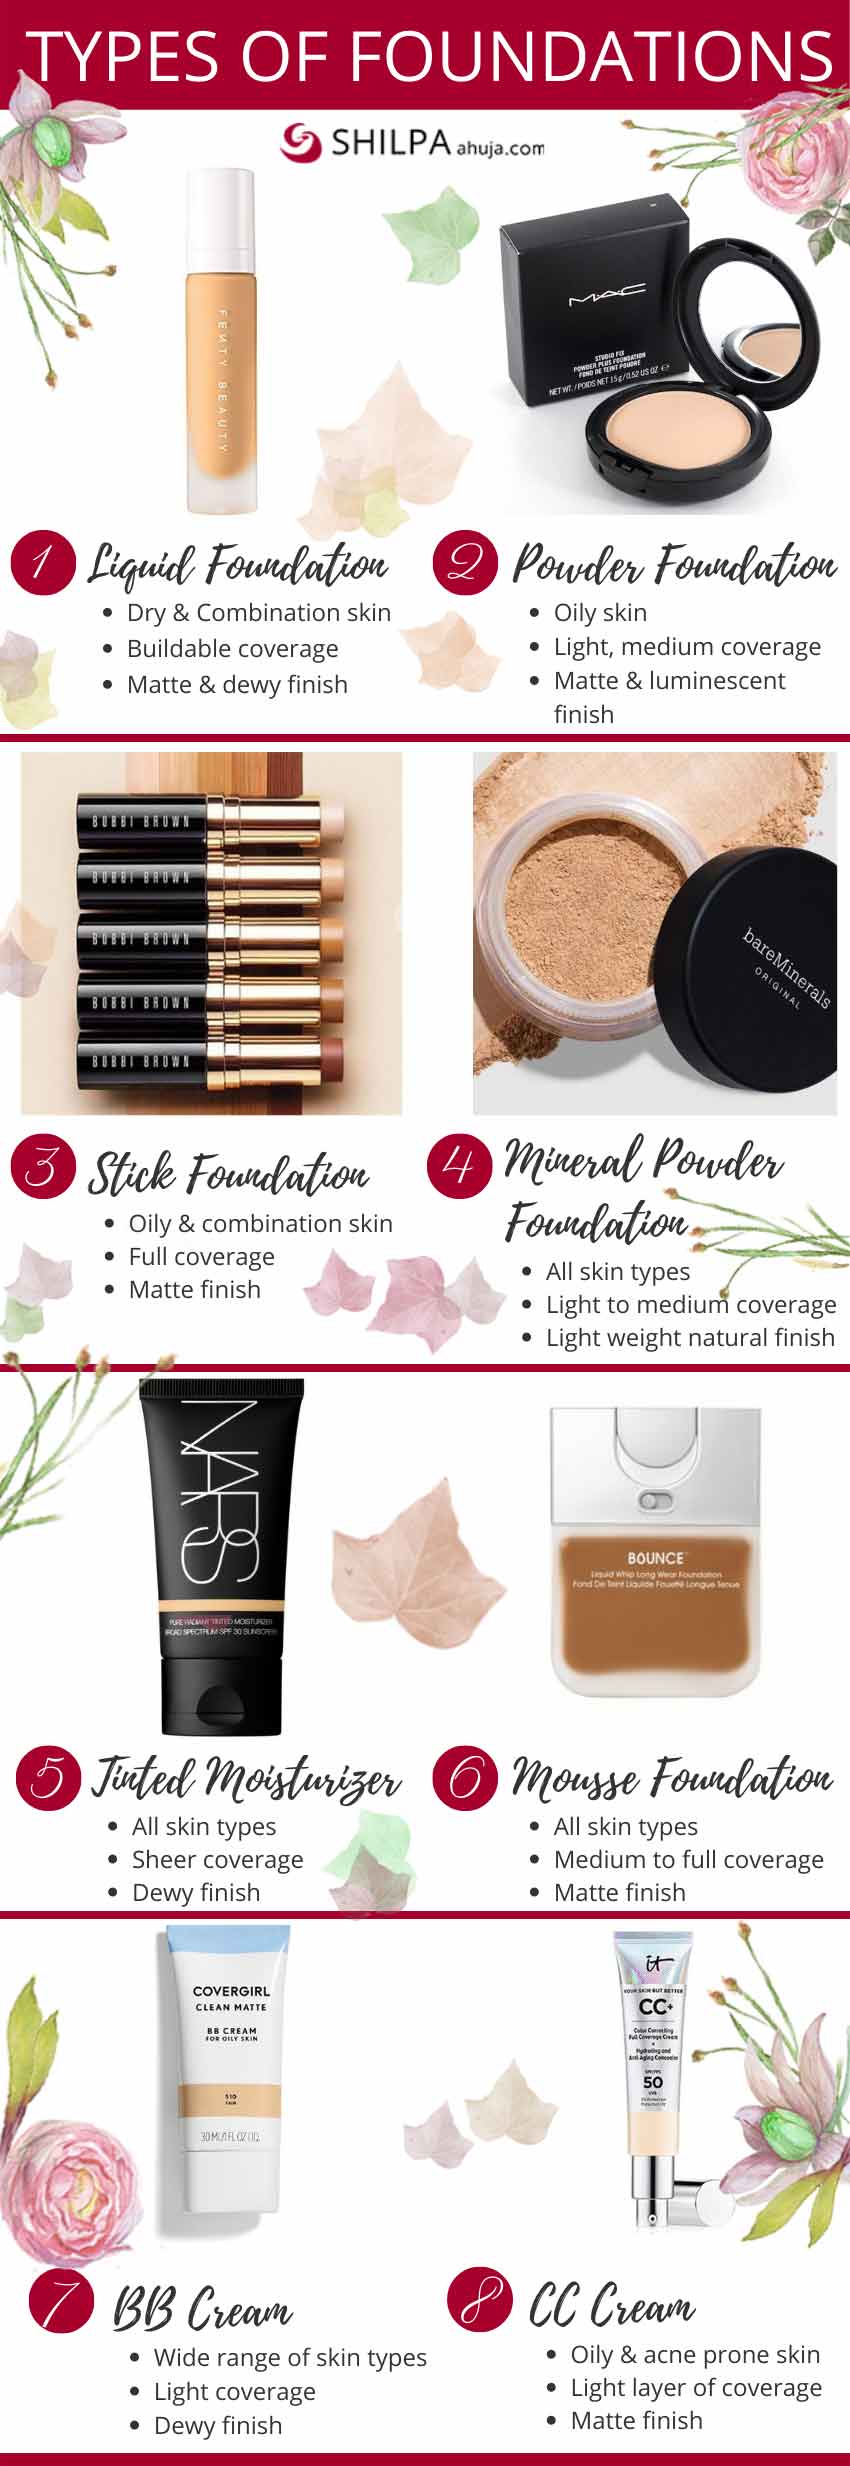 Types-of-foundations-makeup-products-bb-cream